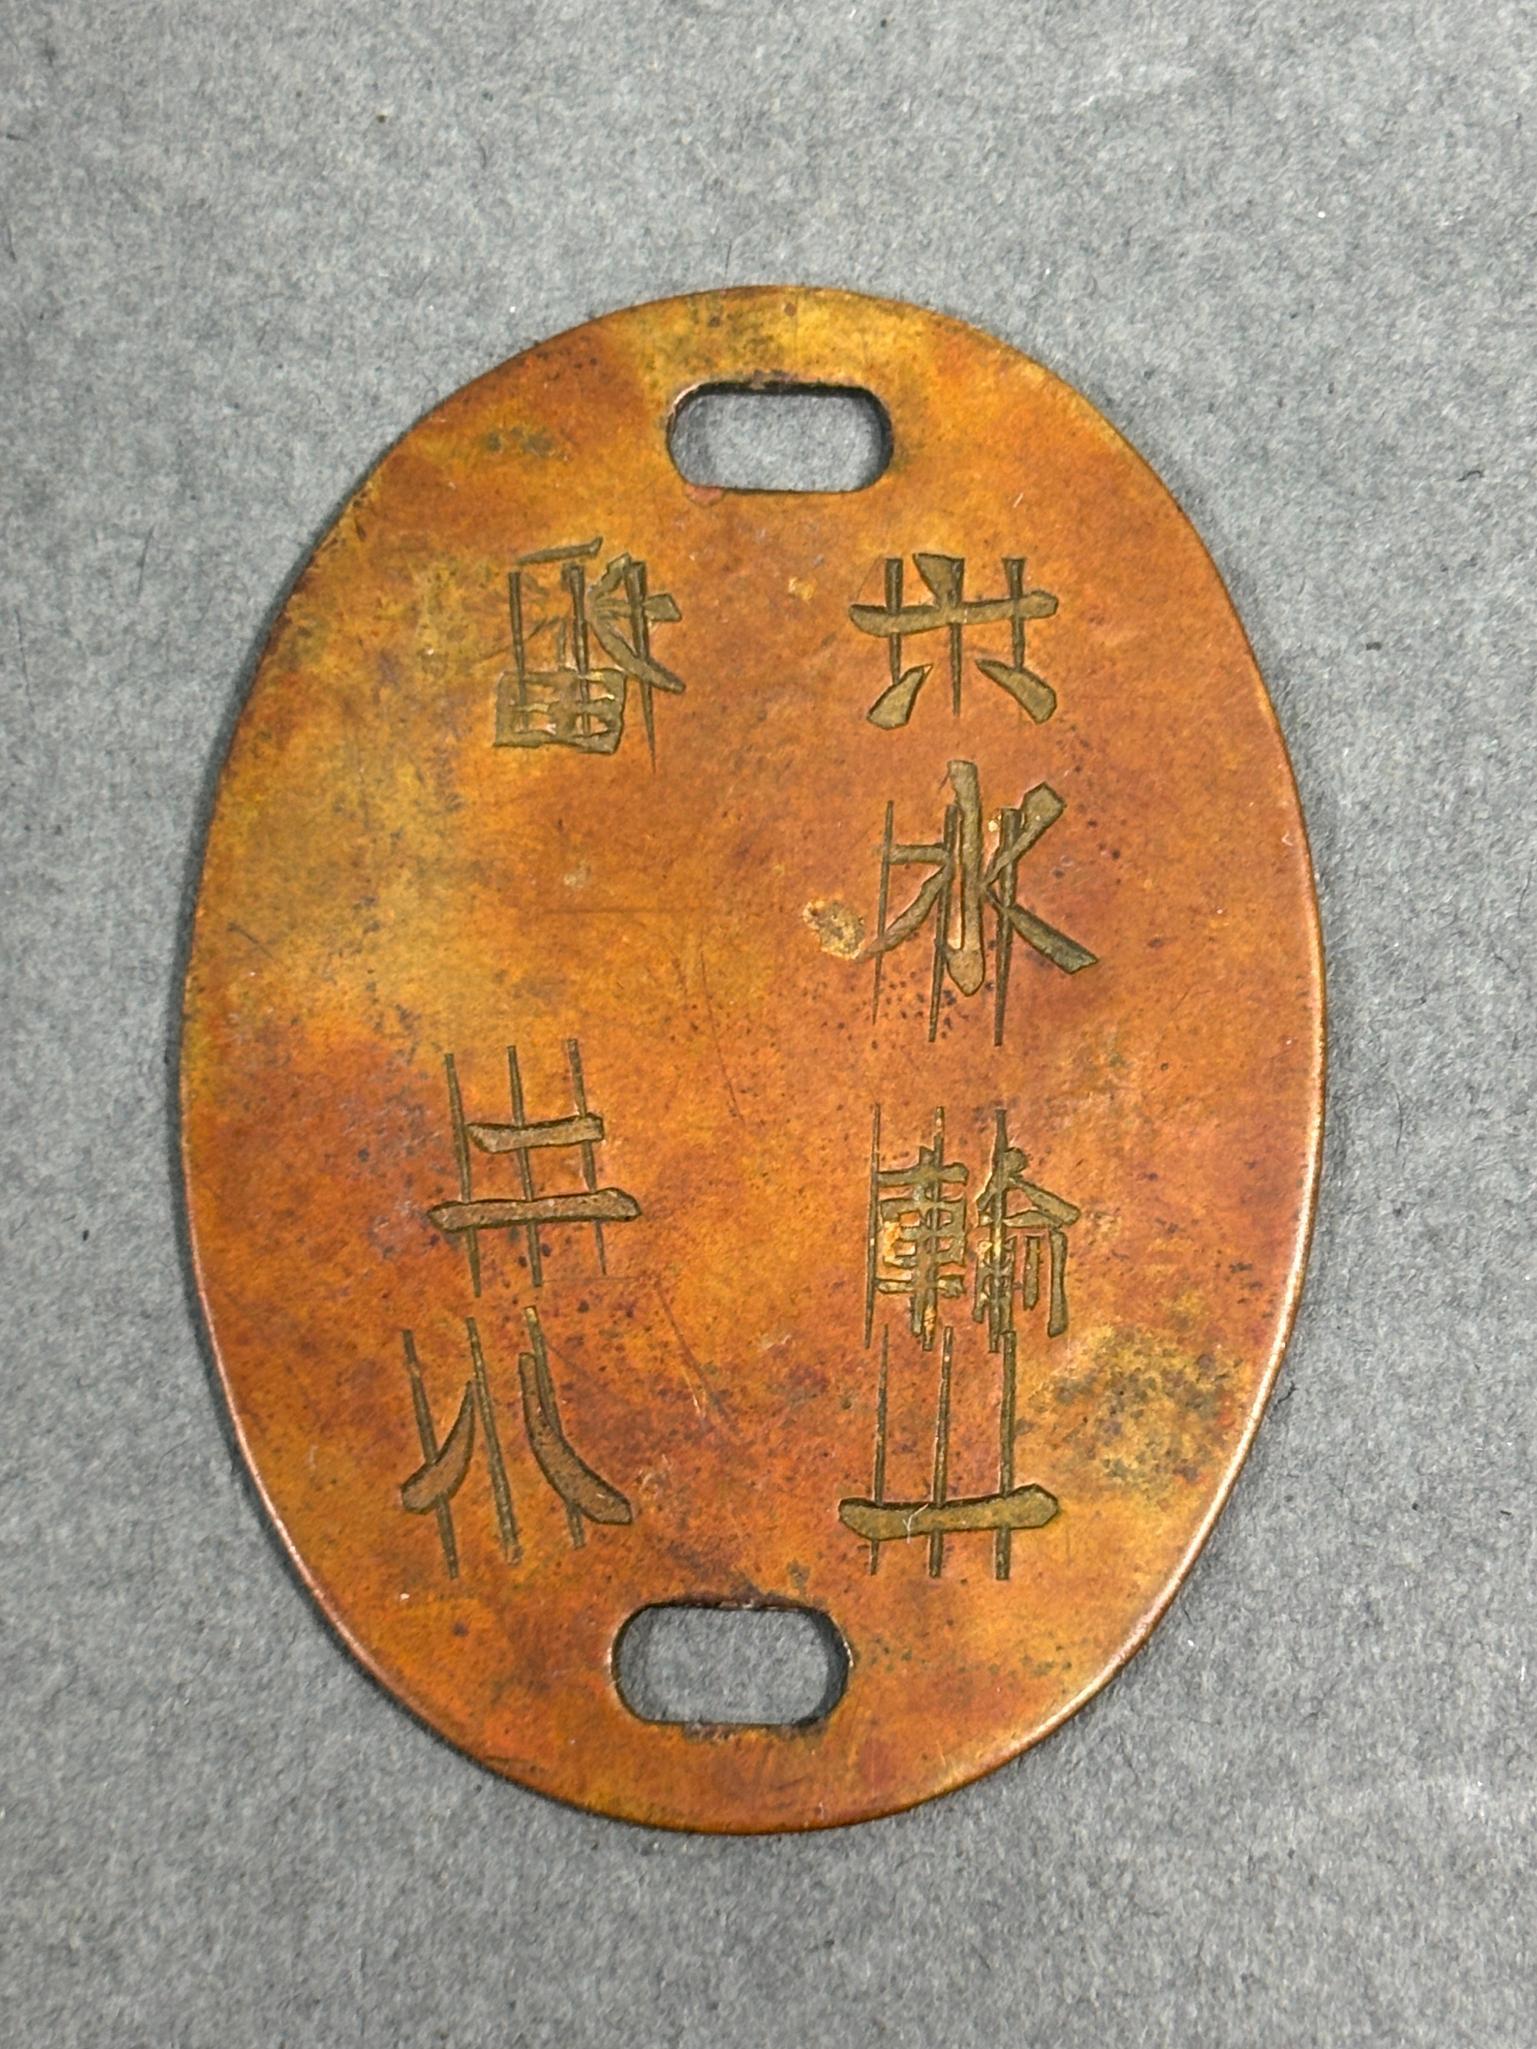 WWII JAPANESE DOG TAG ARTILLERY ID DISC 2 SIDED